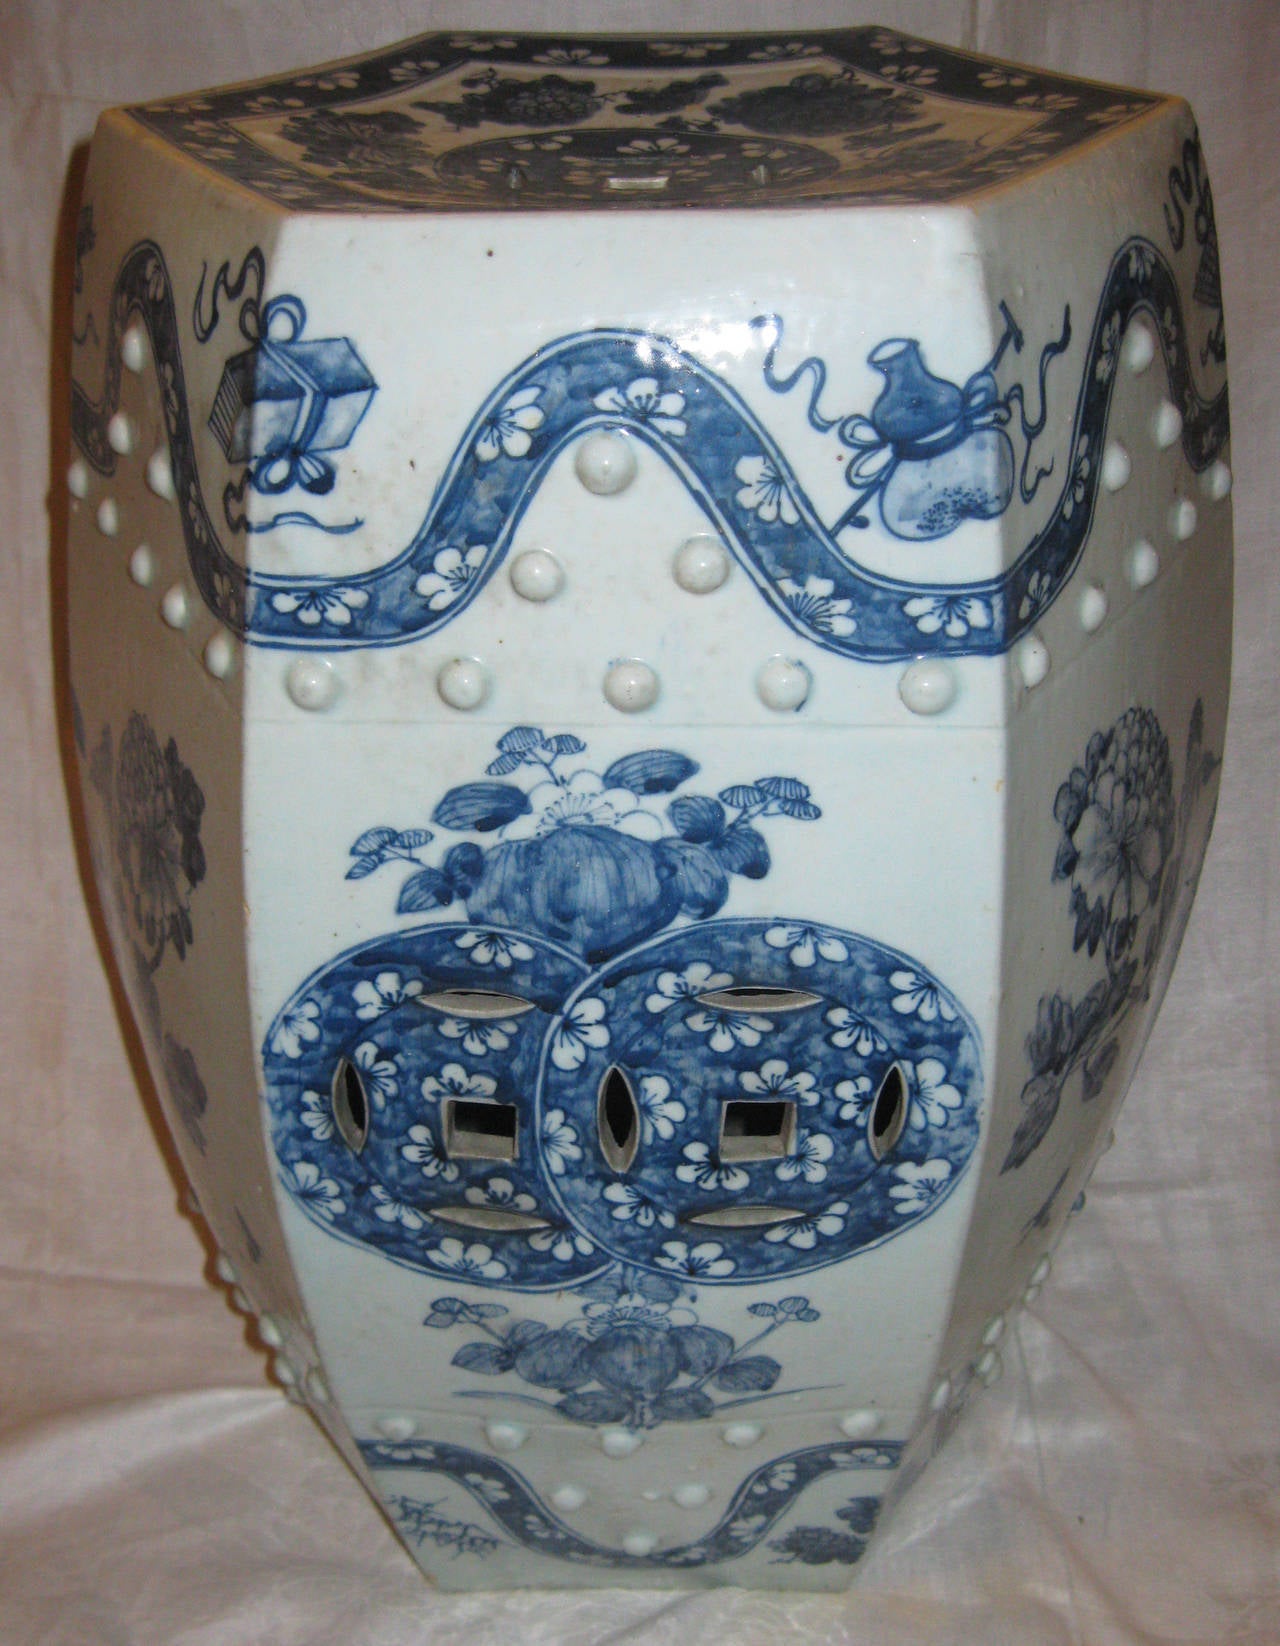 Glazed 20th century Chinese Export Porcelain Garden Seat For Sale